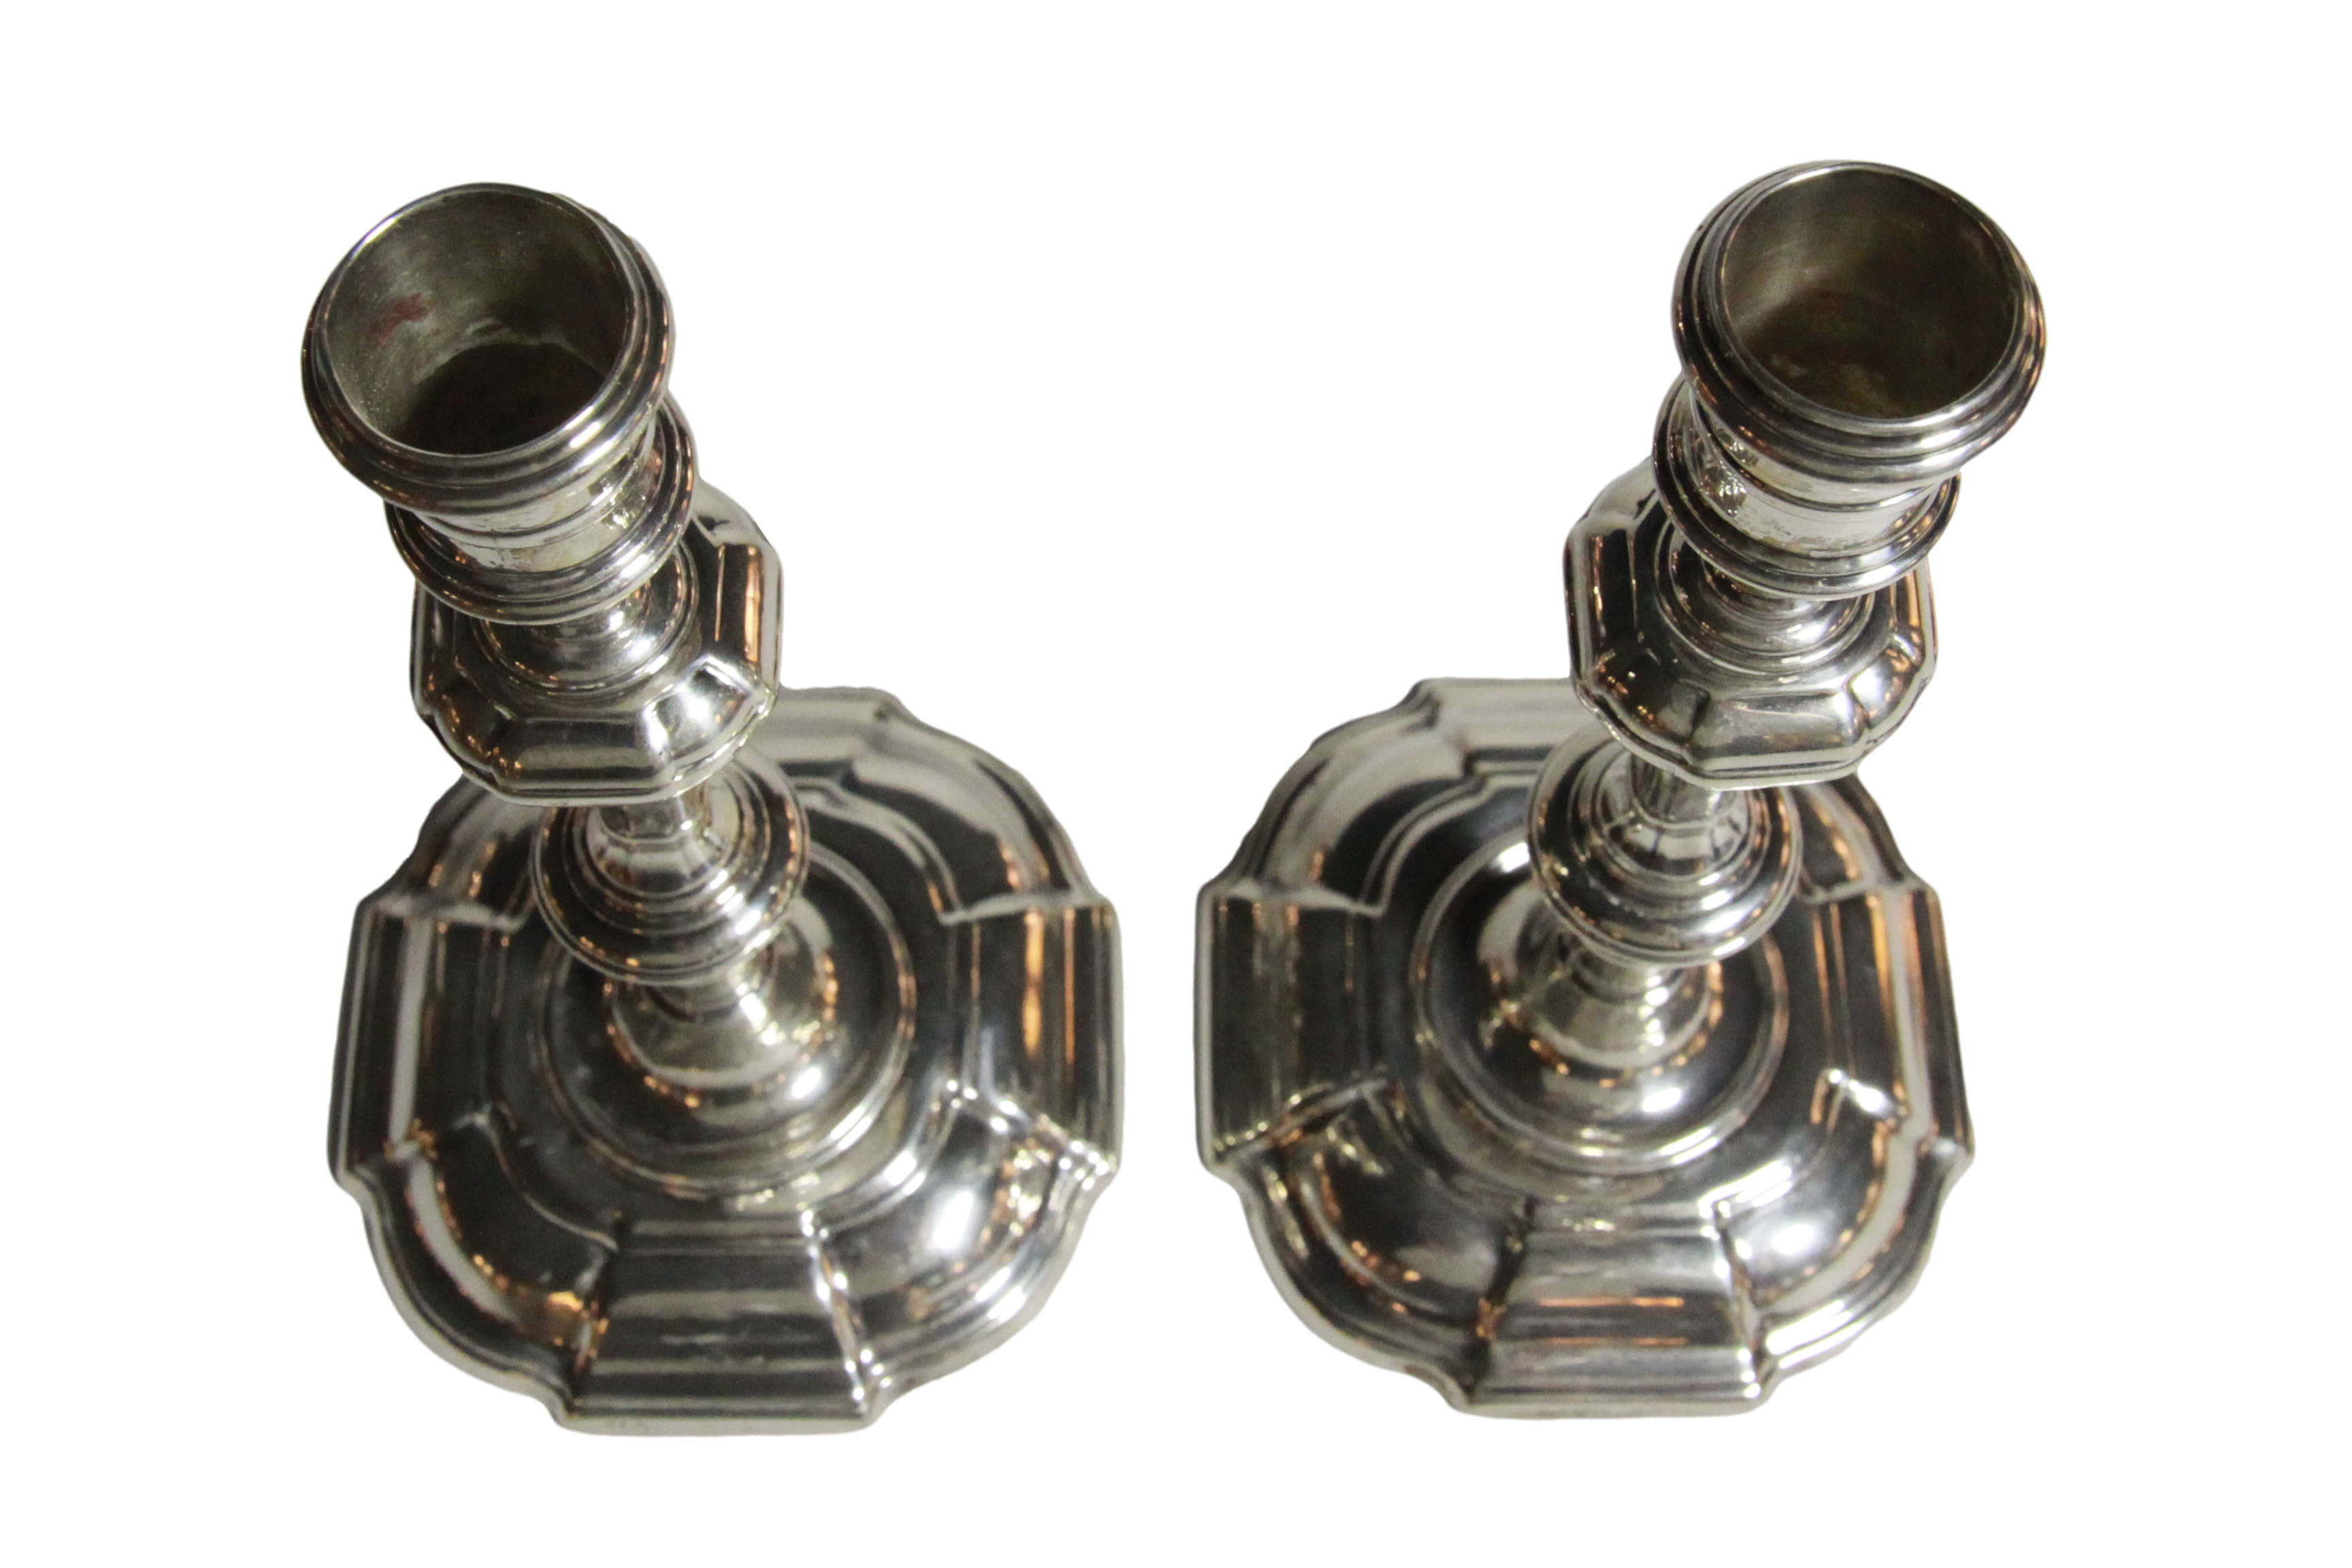 A fine & rare pair of 18th century Guernsey silver George II candlesticks, Henry Guillame - Image 2 of 6